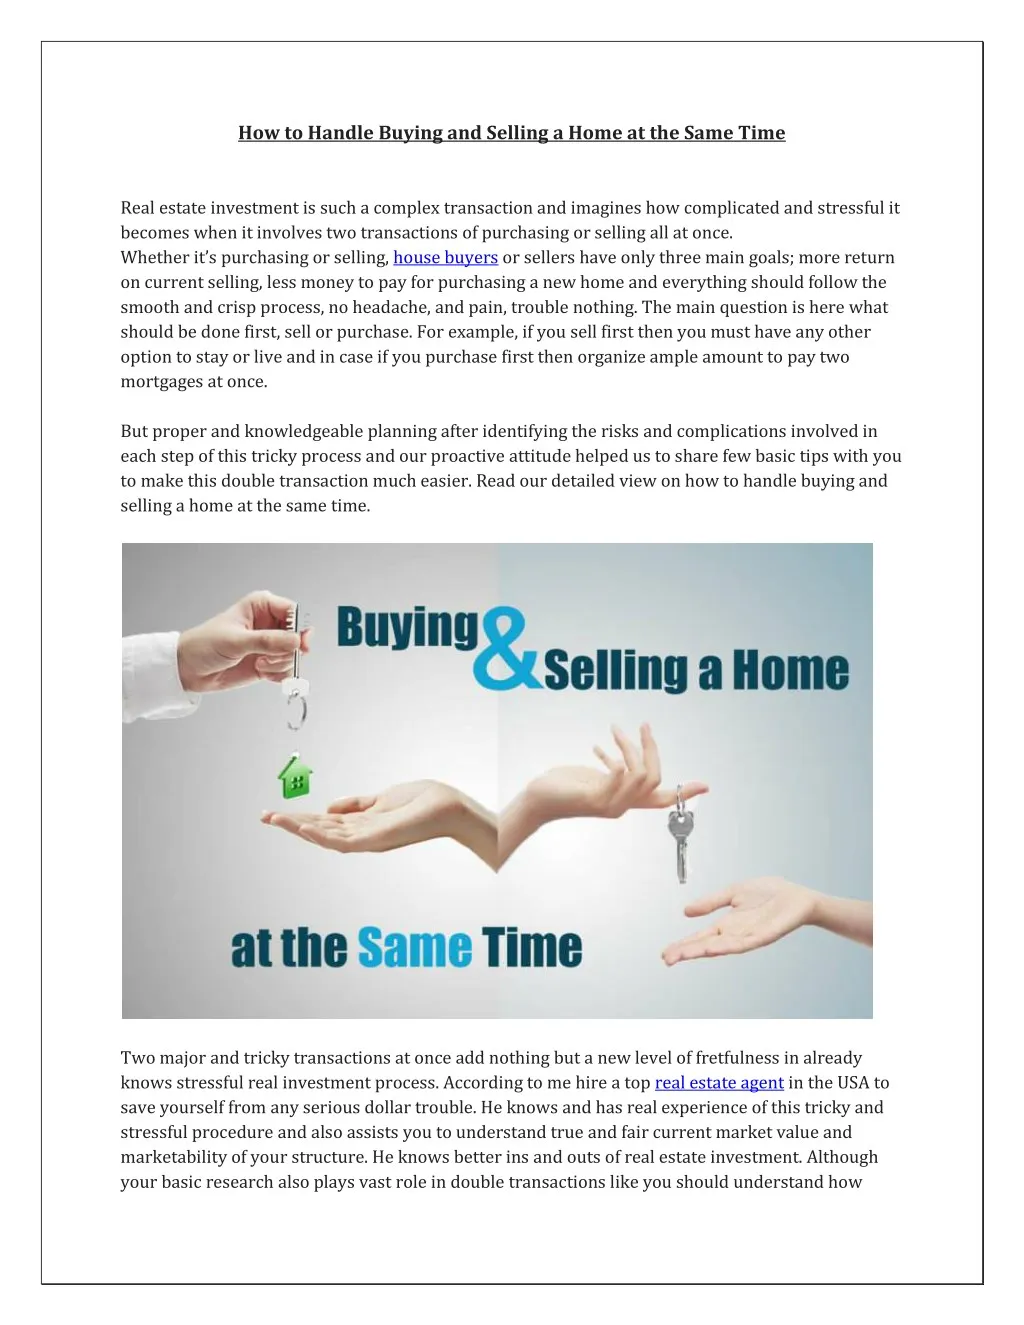 how to handle buying and selling a home